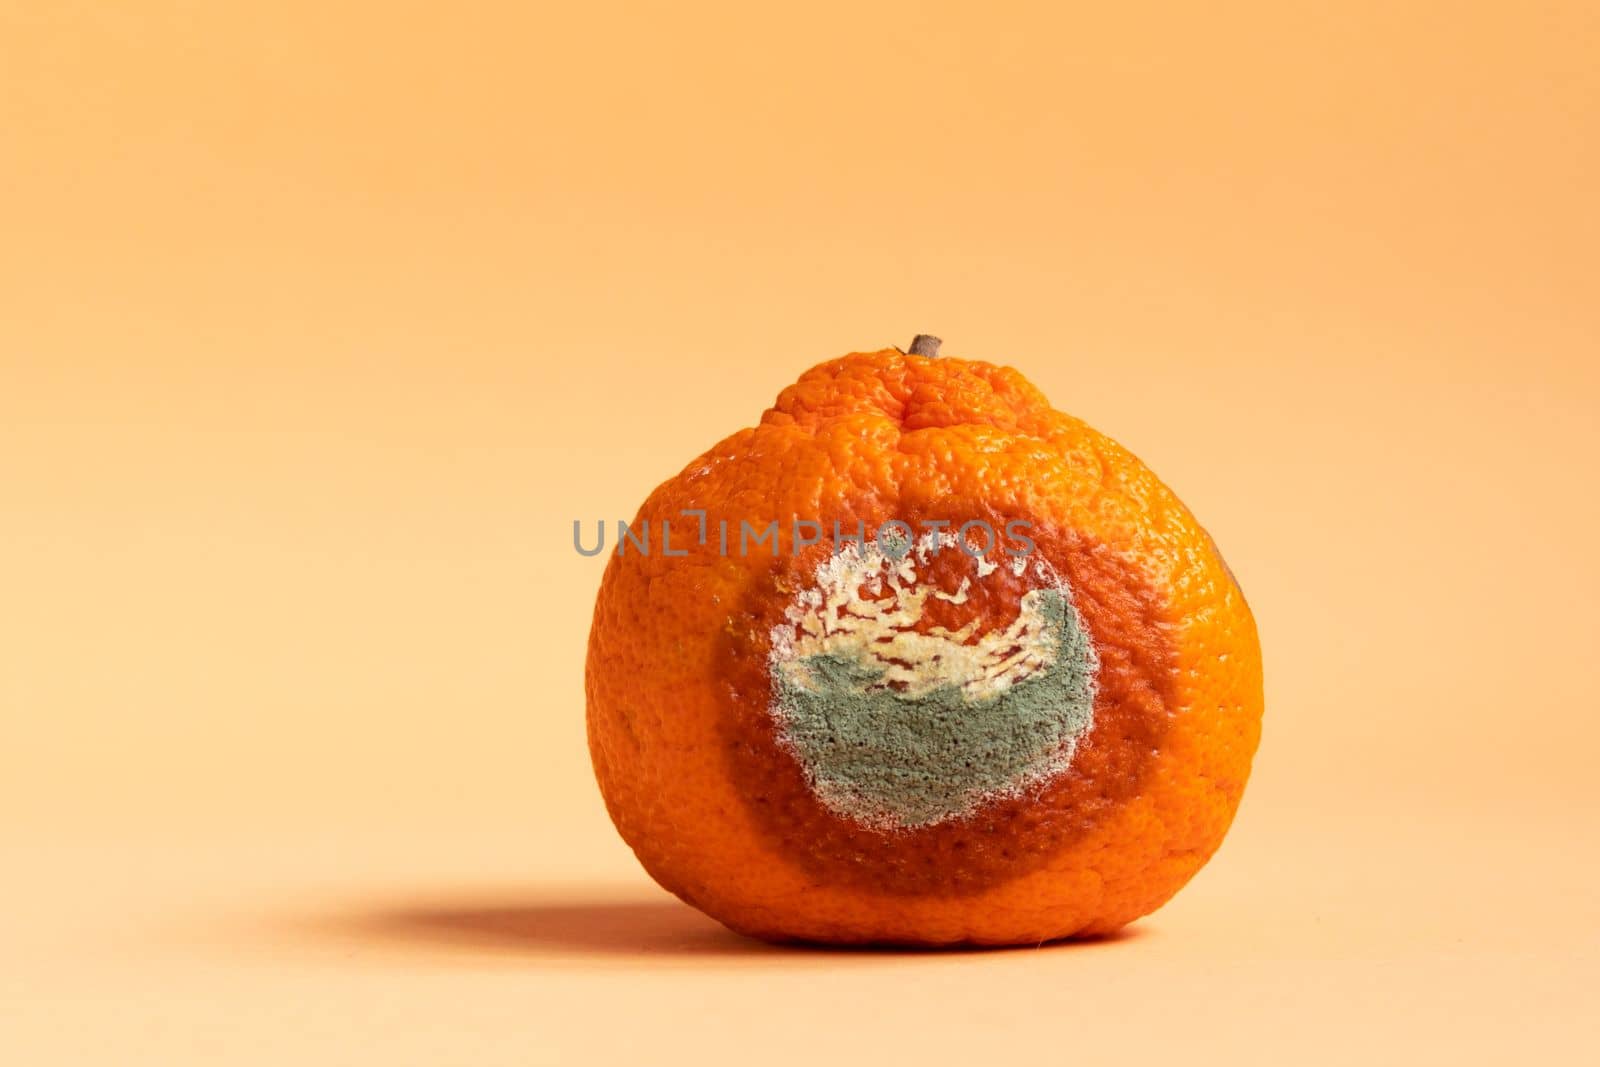 Moldy orange. Rottan moldy fruit. Mould, mildew covered foods. Concept of stop food waste day. Copy space. by Ri6ka